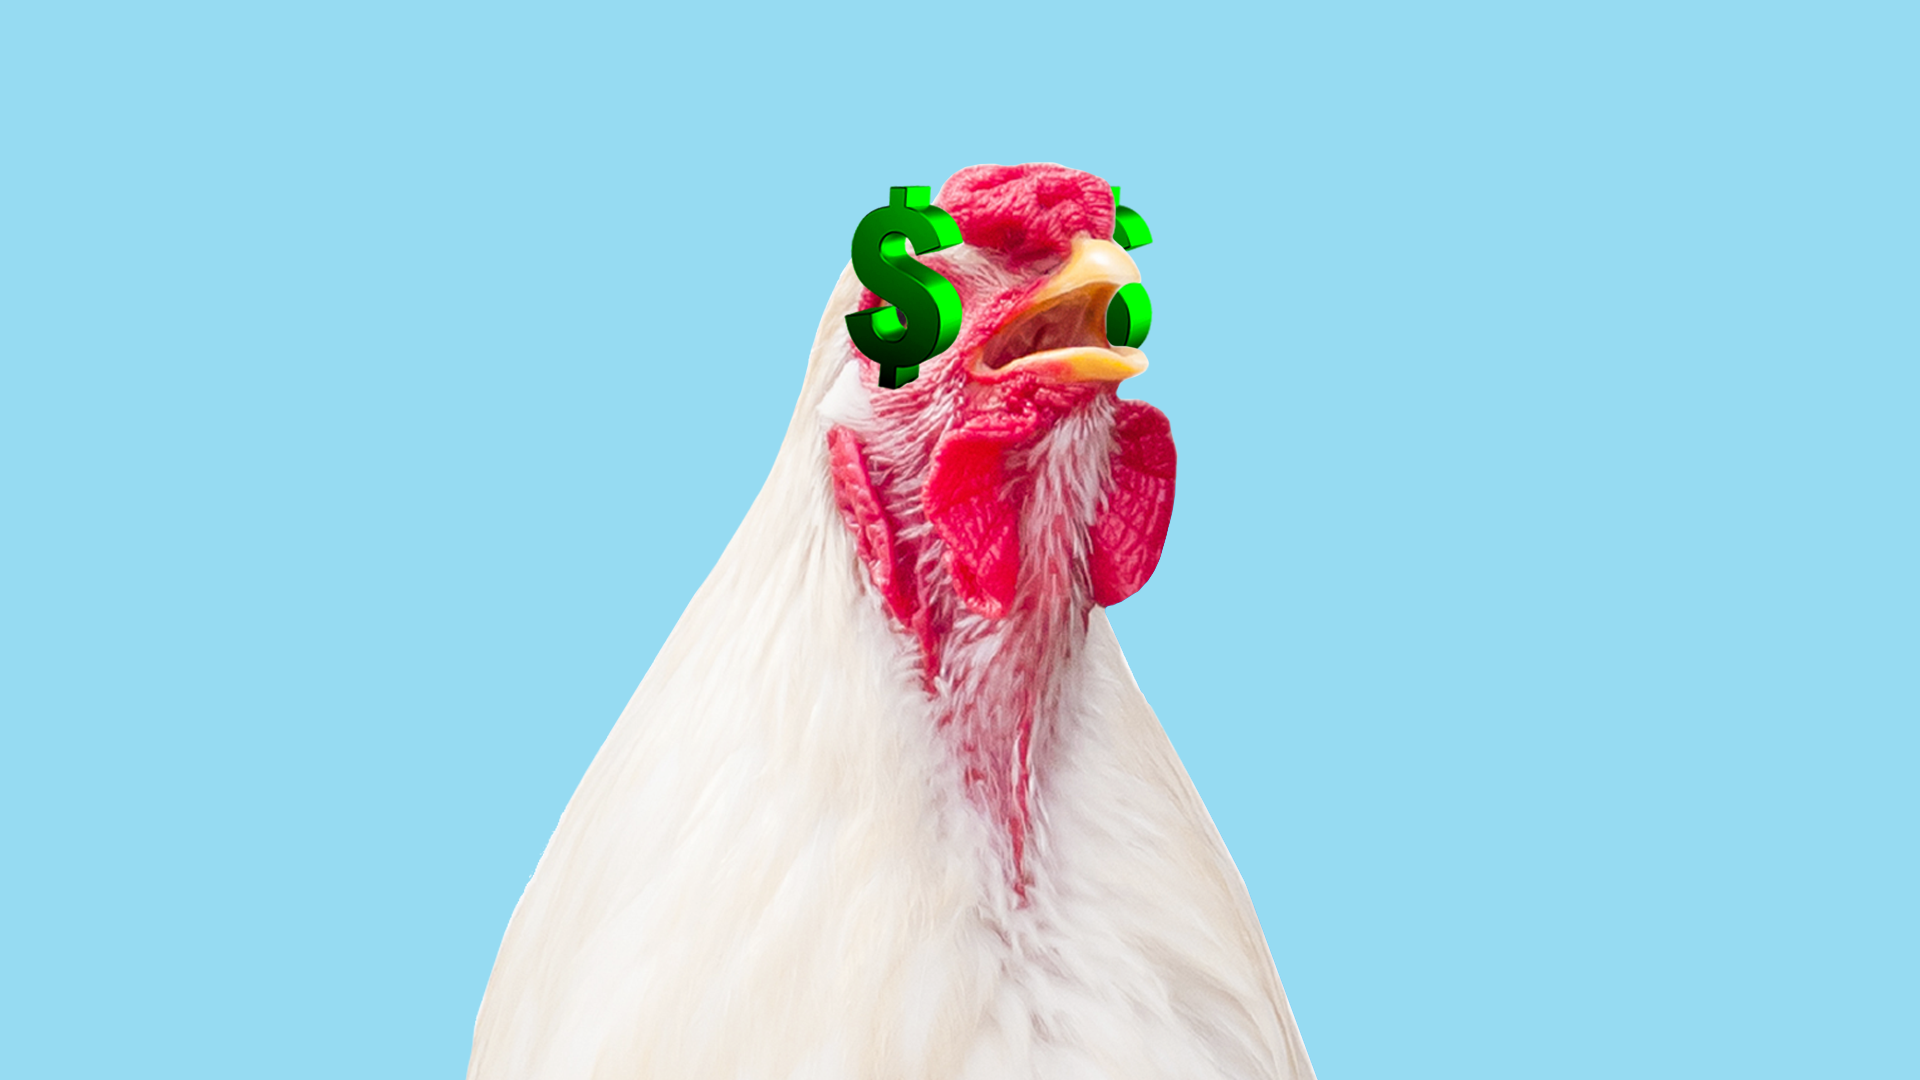 Illustration of a chicken with dollar signs for eyes.